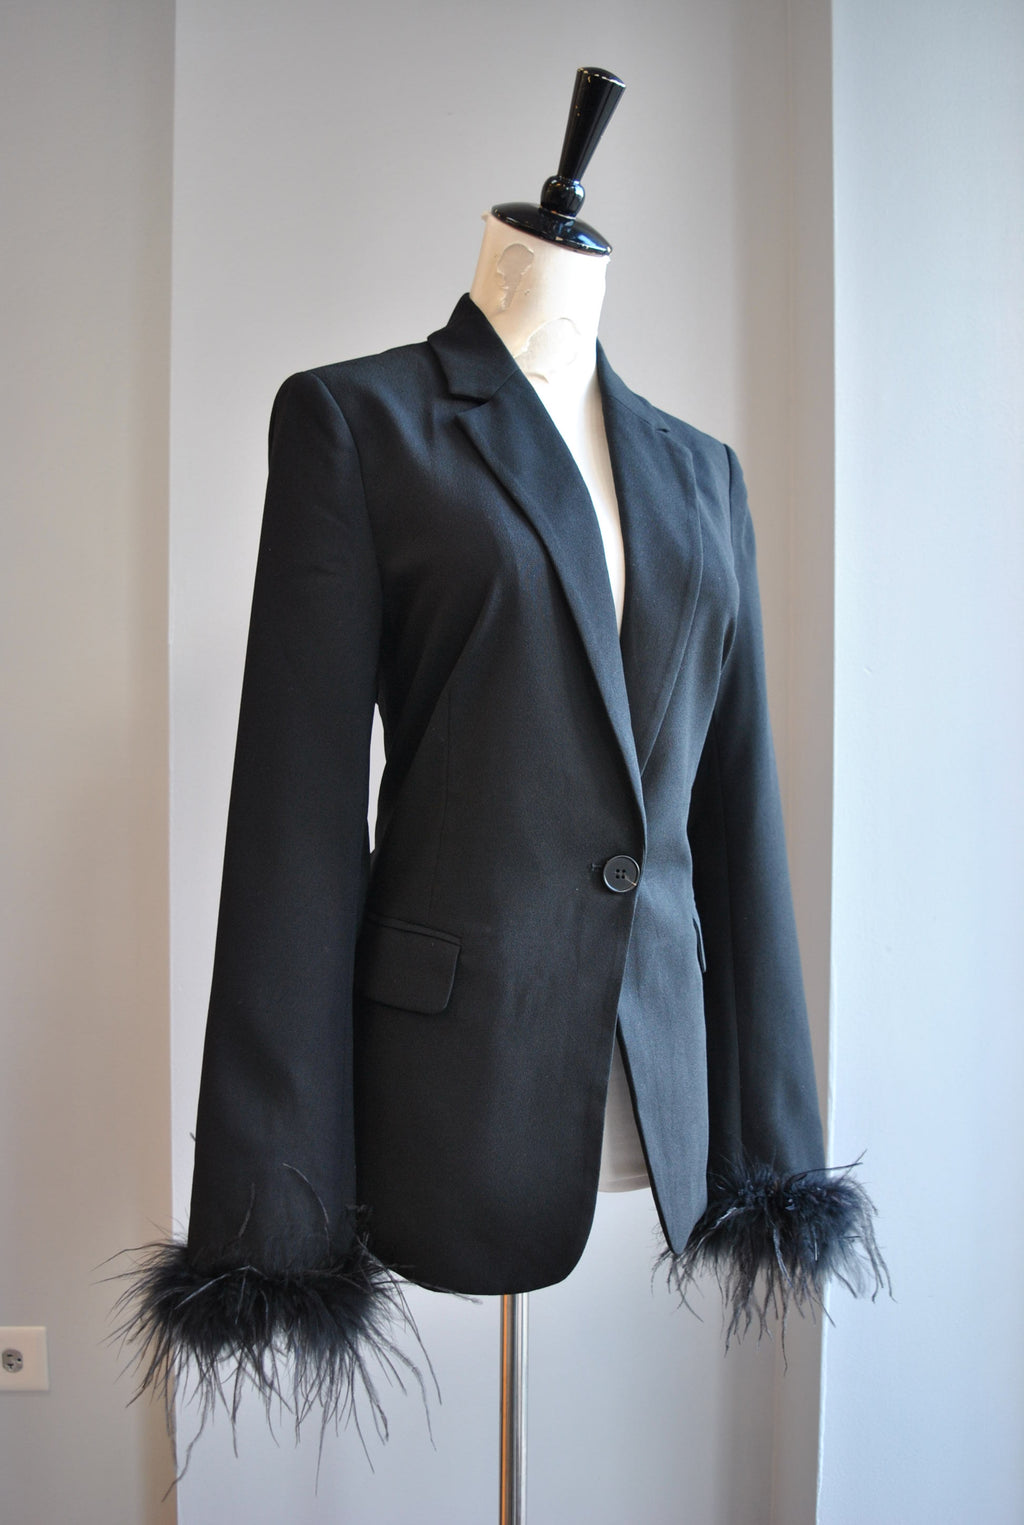 BLACK FIT BLAZER WITH FEATHERS